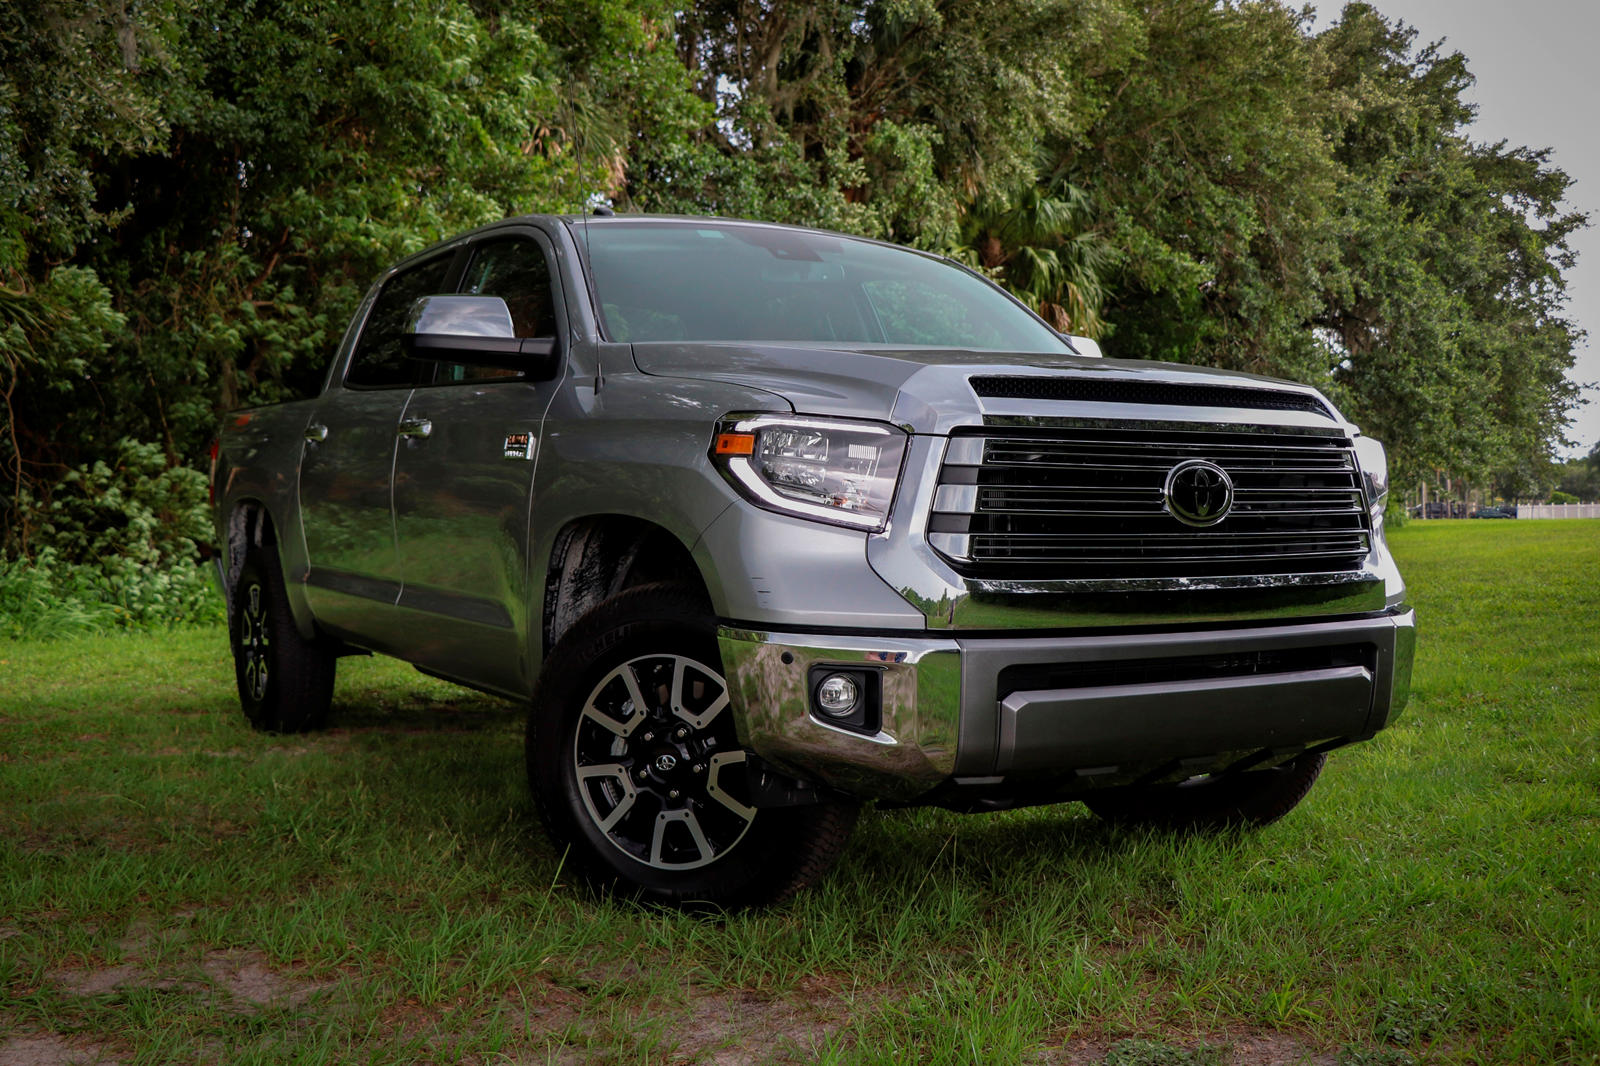 241New Look Is toyota tundra diesel for Iphone Home Screen